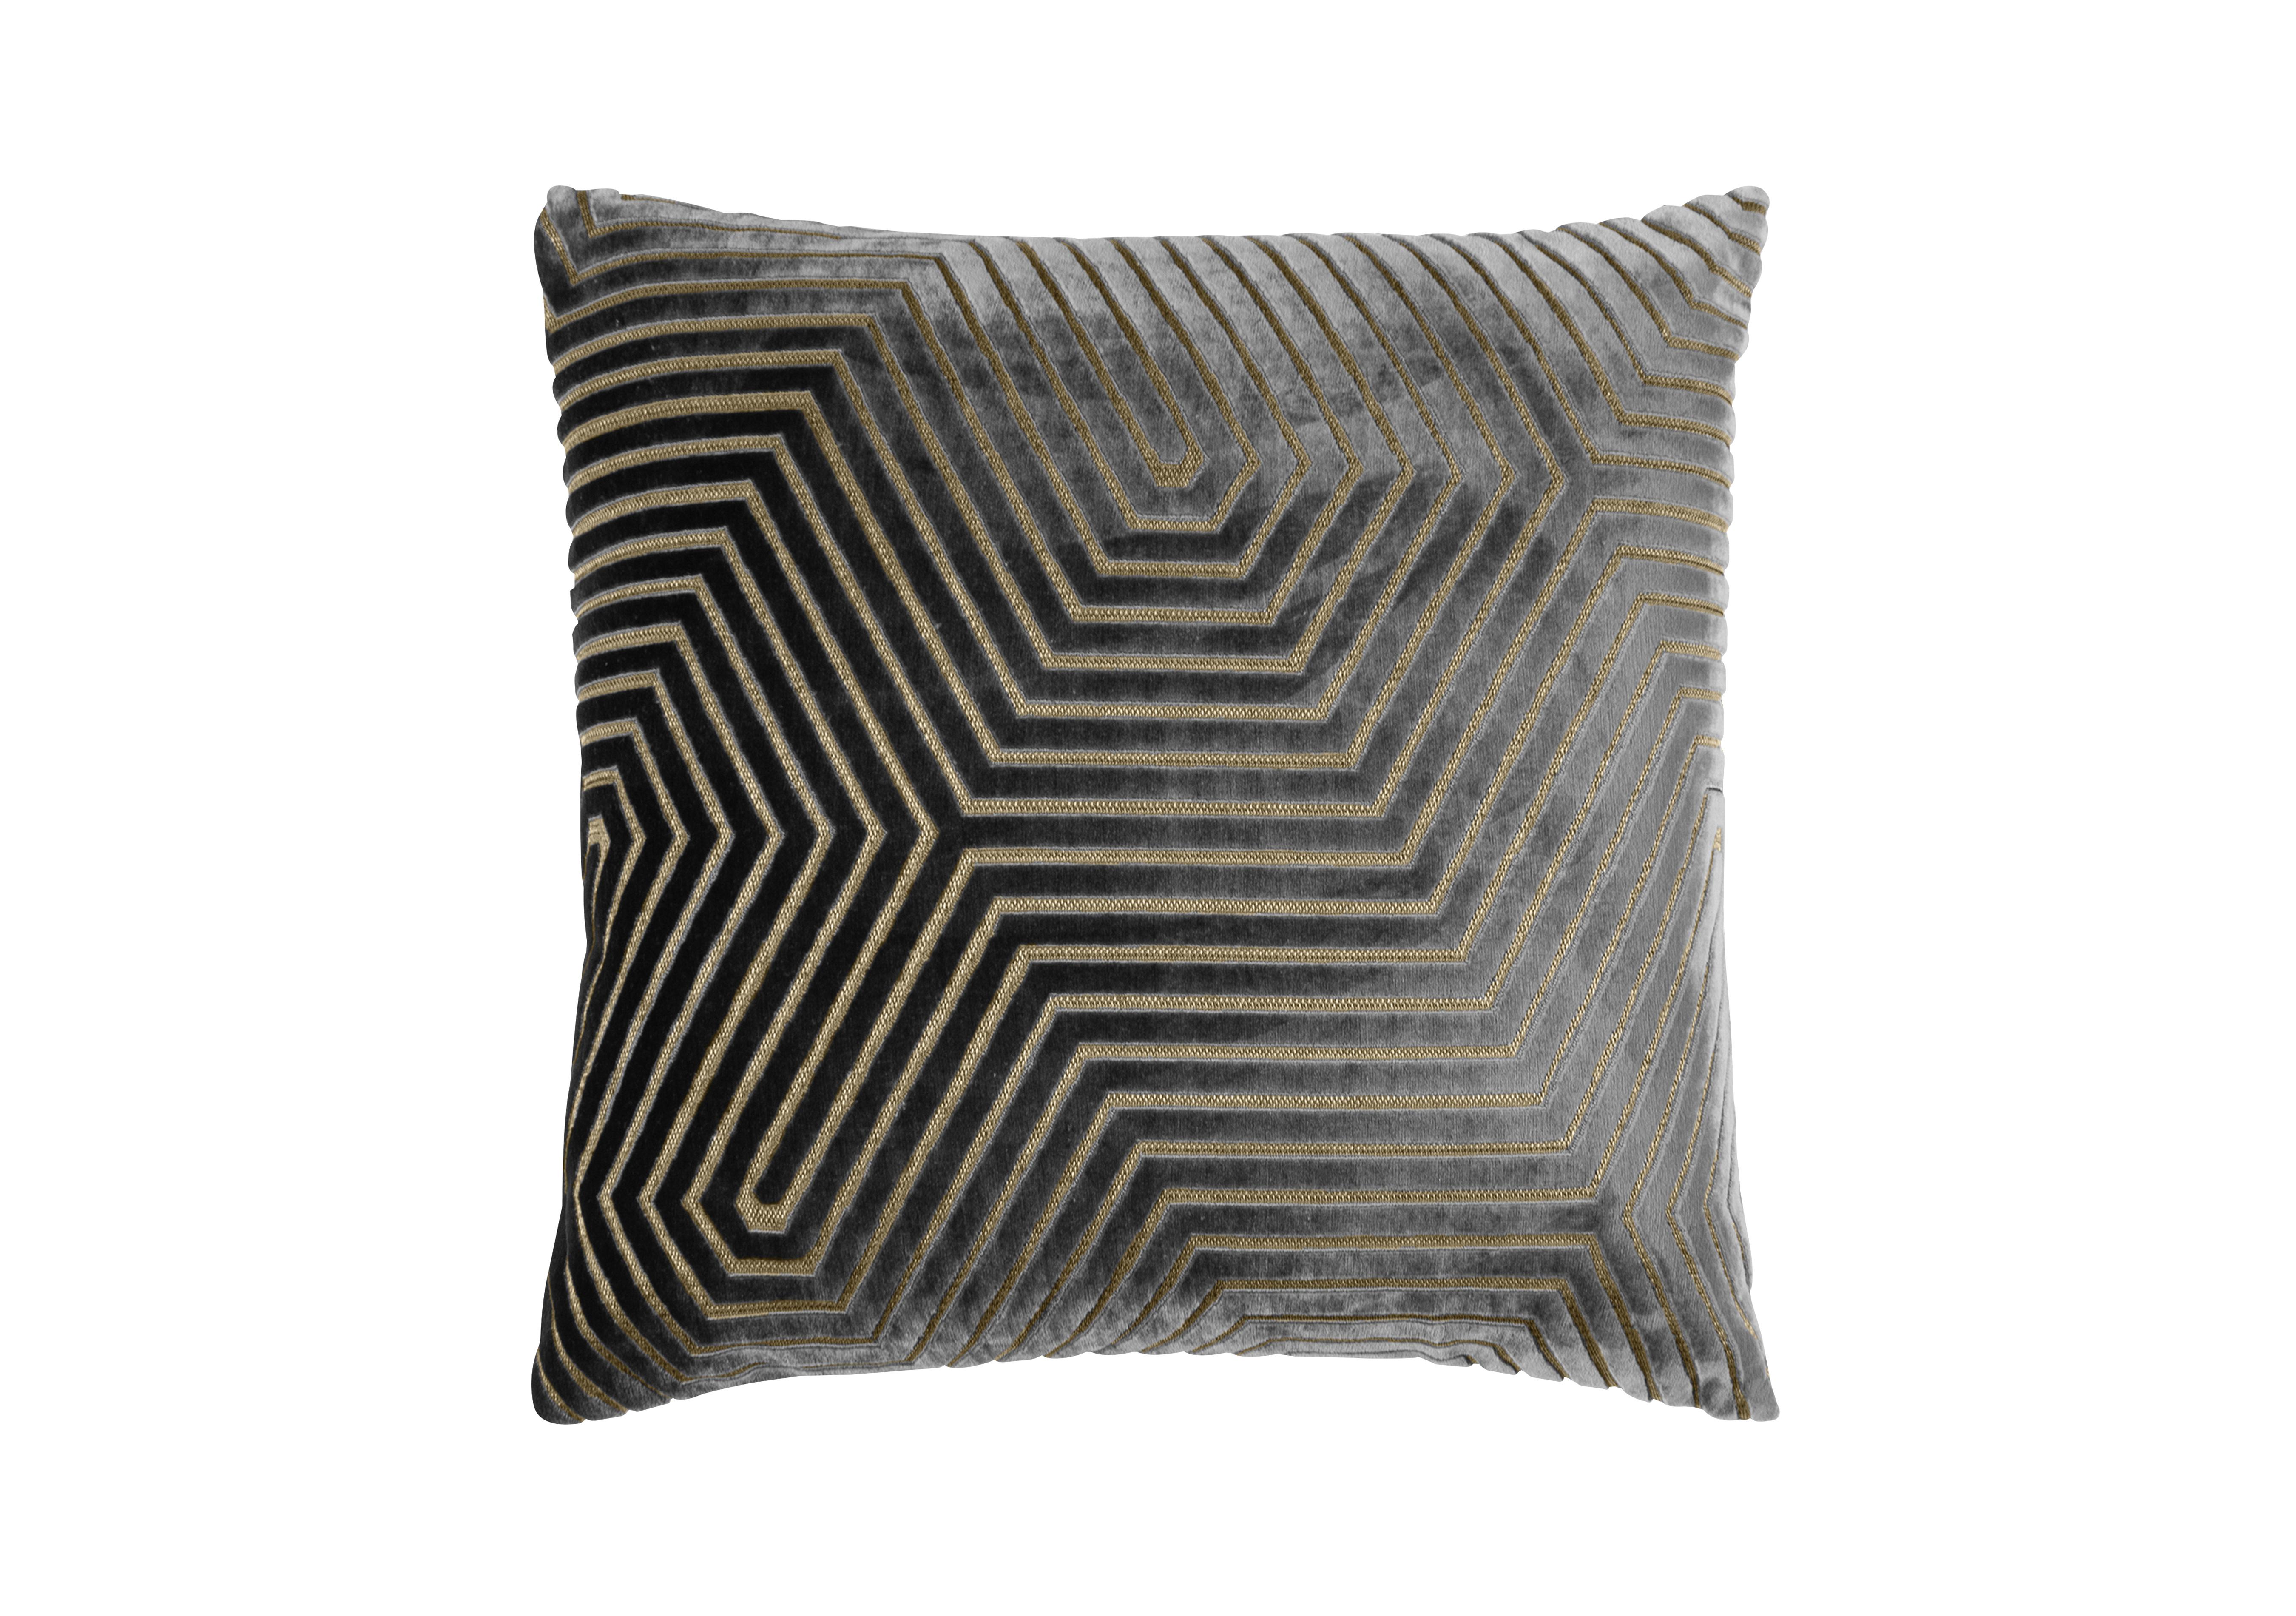 Avira Feather Cushion in Charcoal on Furniture Village